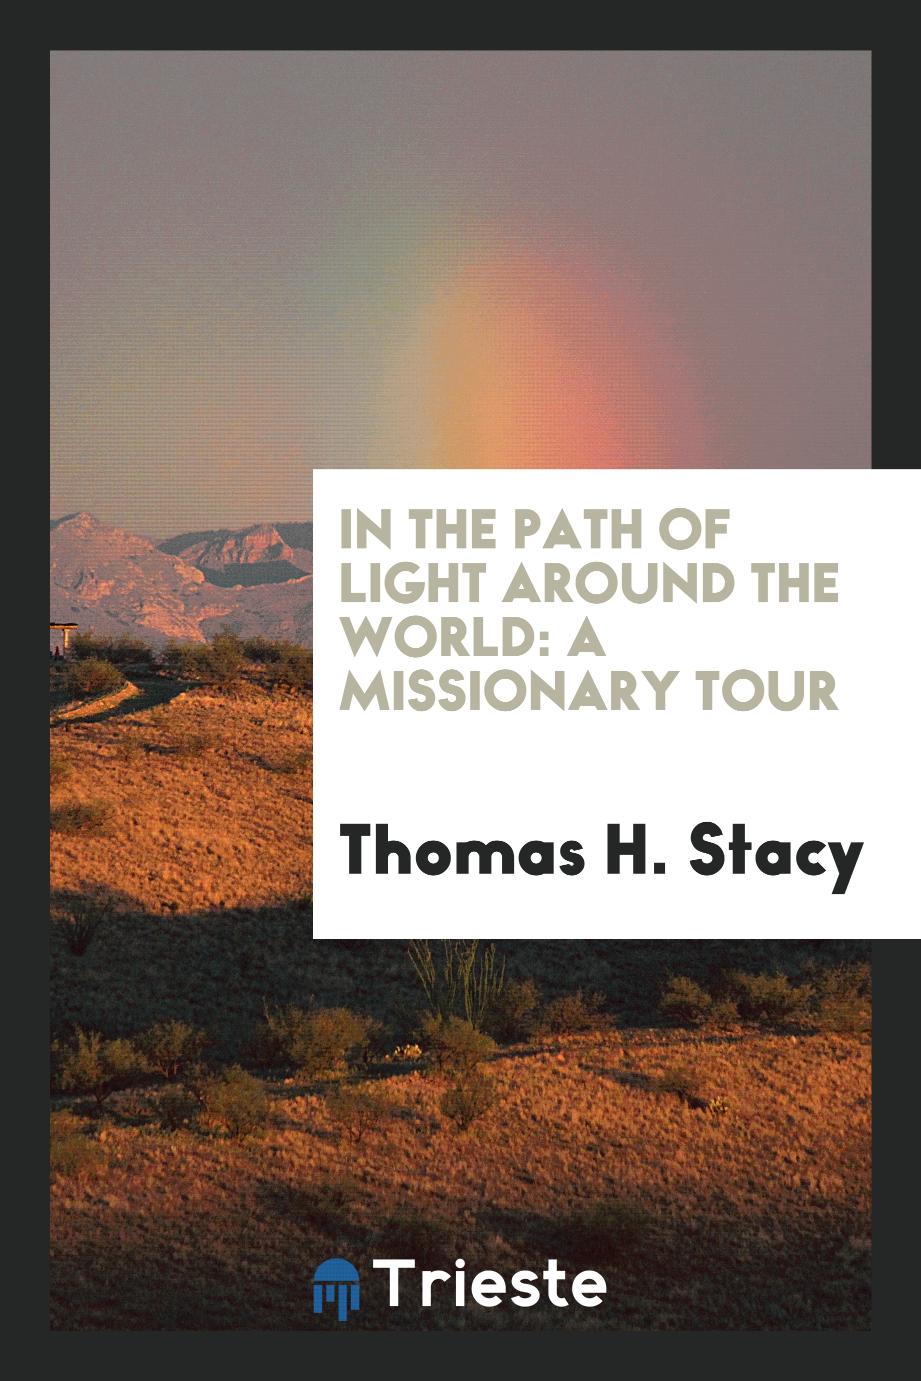 In the path of light around the world: a missionary tour